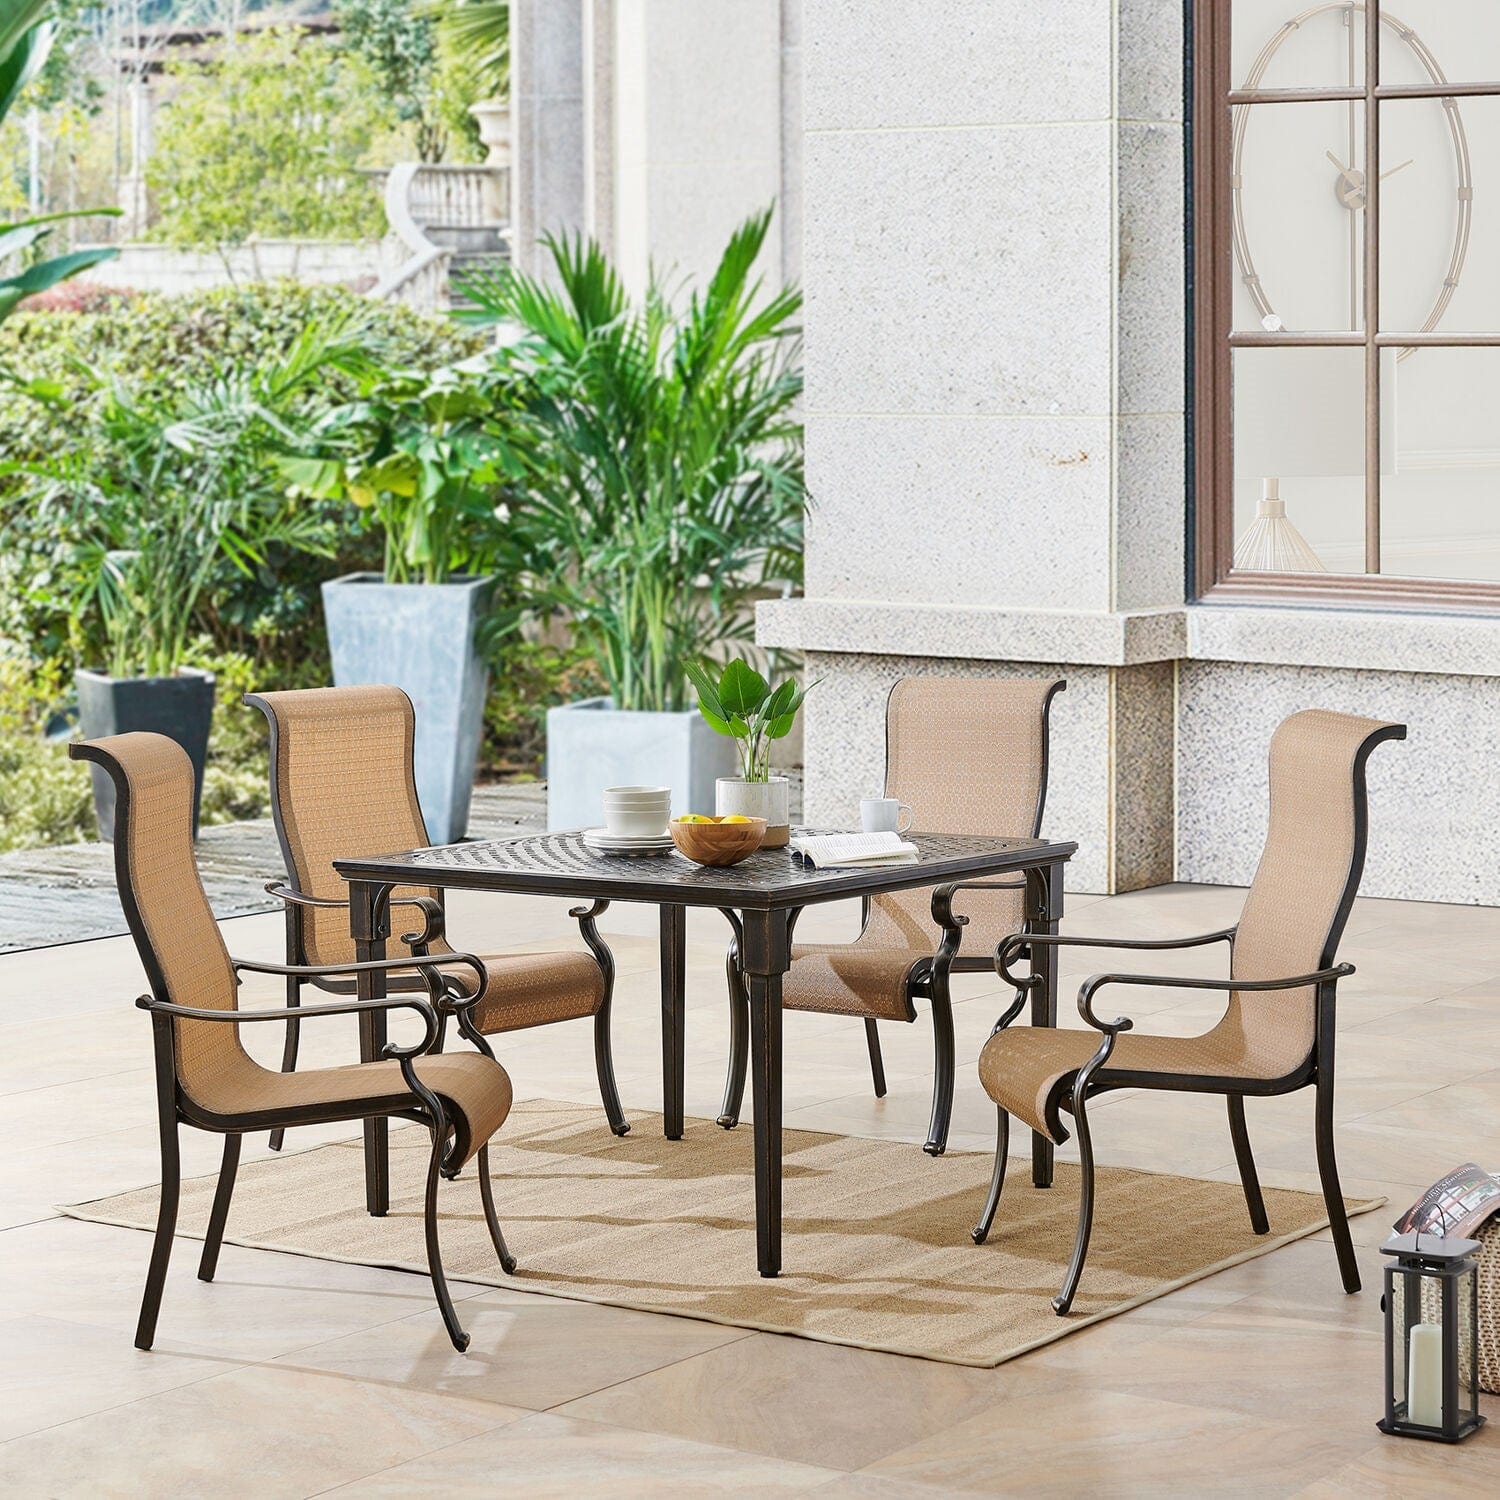 Hanover Outdoor Dining Set Hanover Brigantine 5 Piece Outdoor Dining Set with 4 Contoured-Sling Chairs and a 42-In. Square Cast-Top Table | Tan/Bronze | BRIGDN5PCSQ